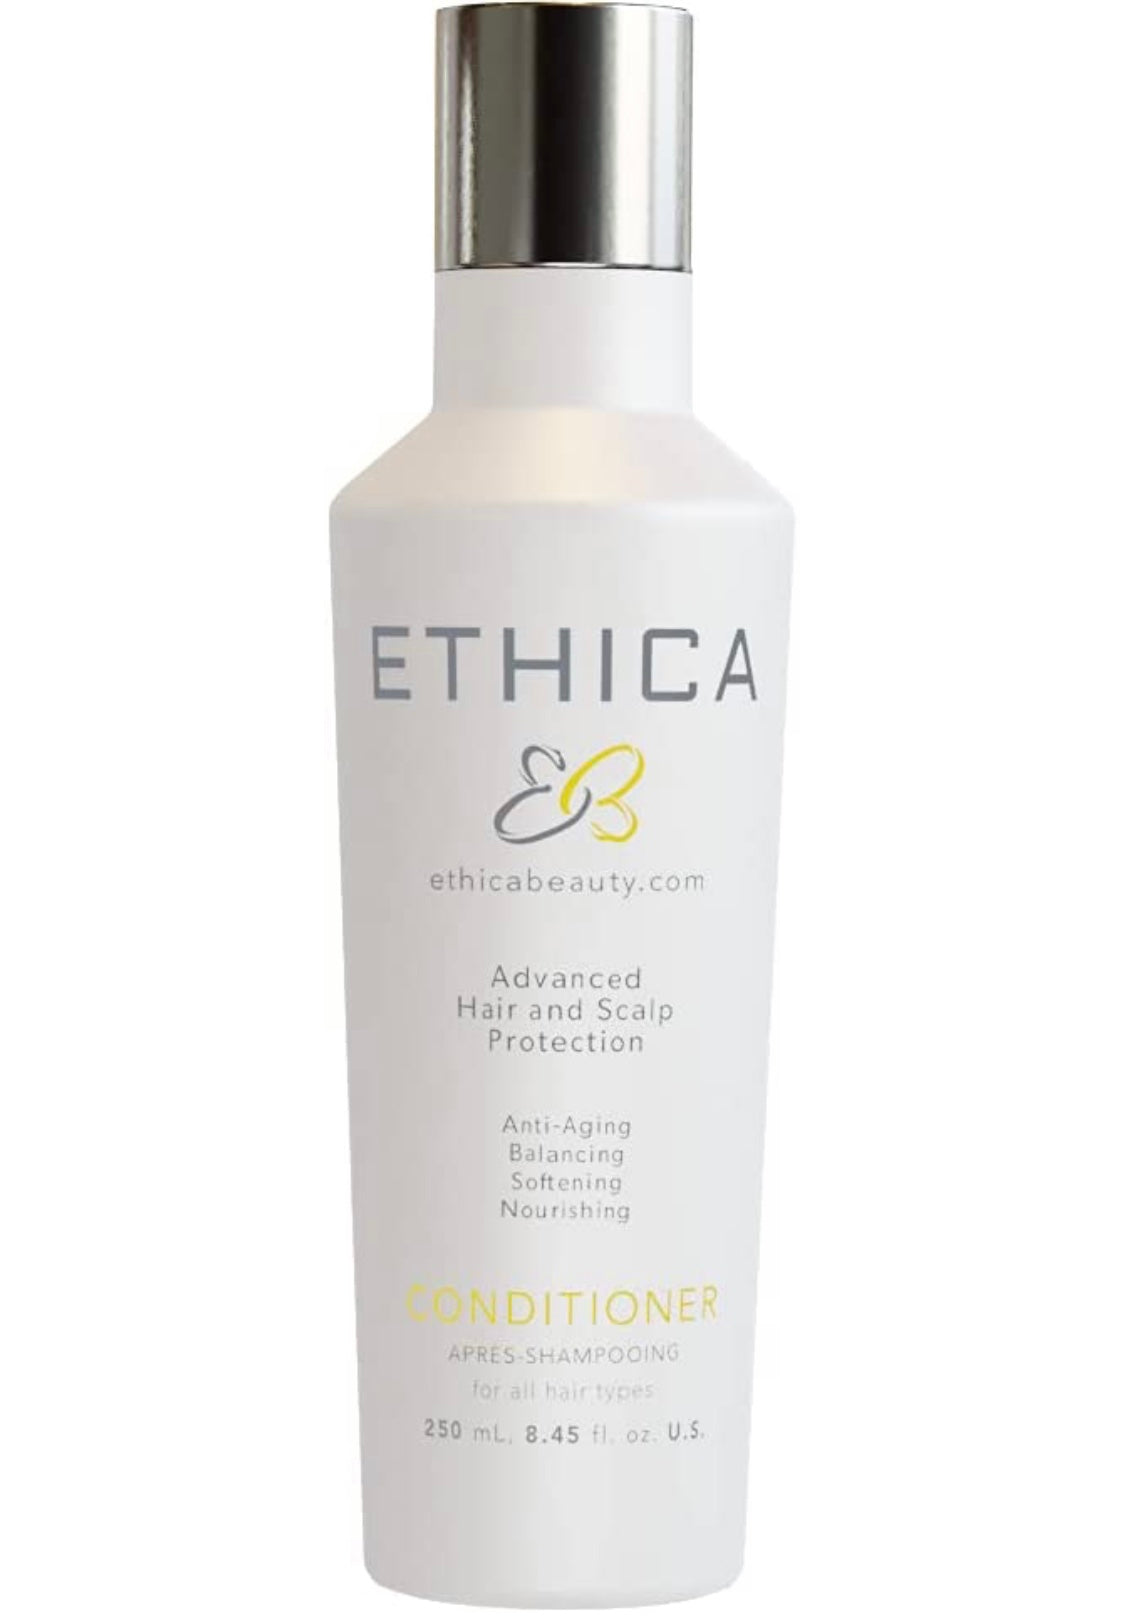 Ethica   - Advanced hair and scalp protection conditioner 8.45 fl. oz./ 250 ml